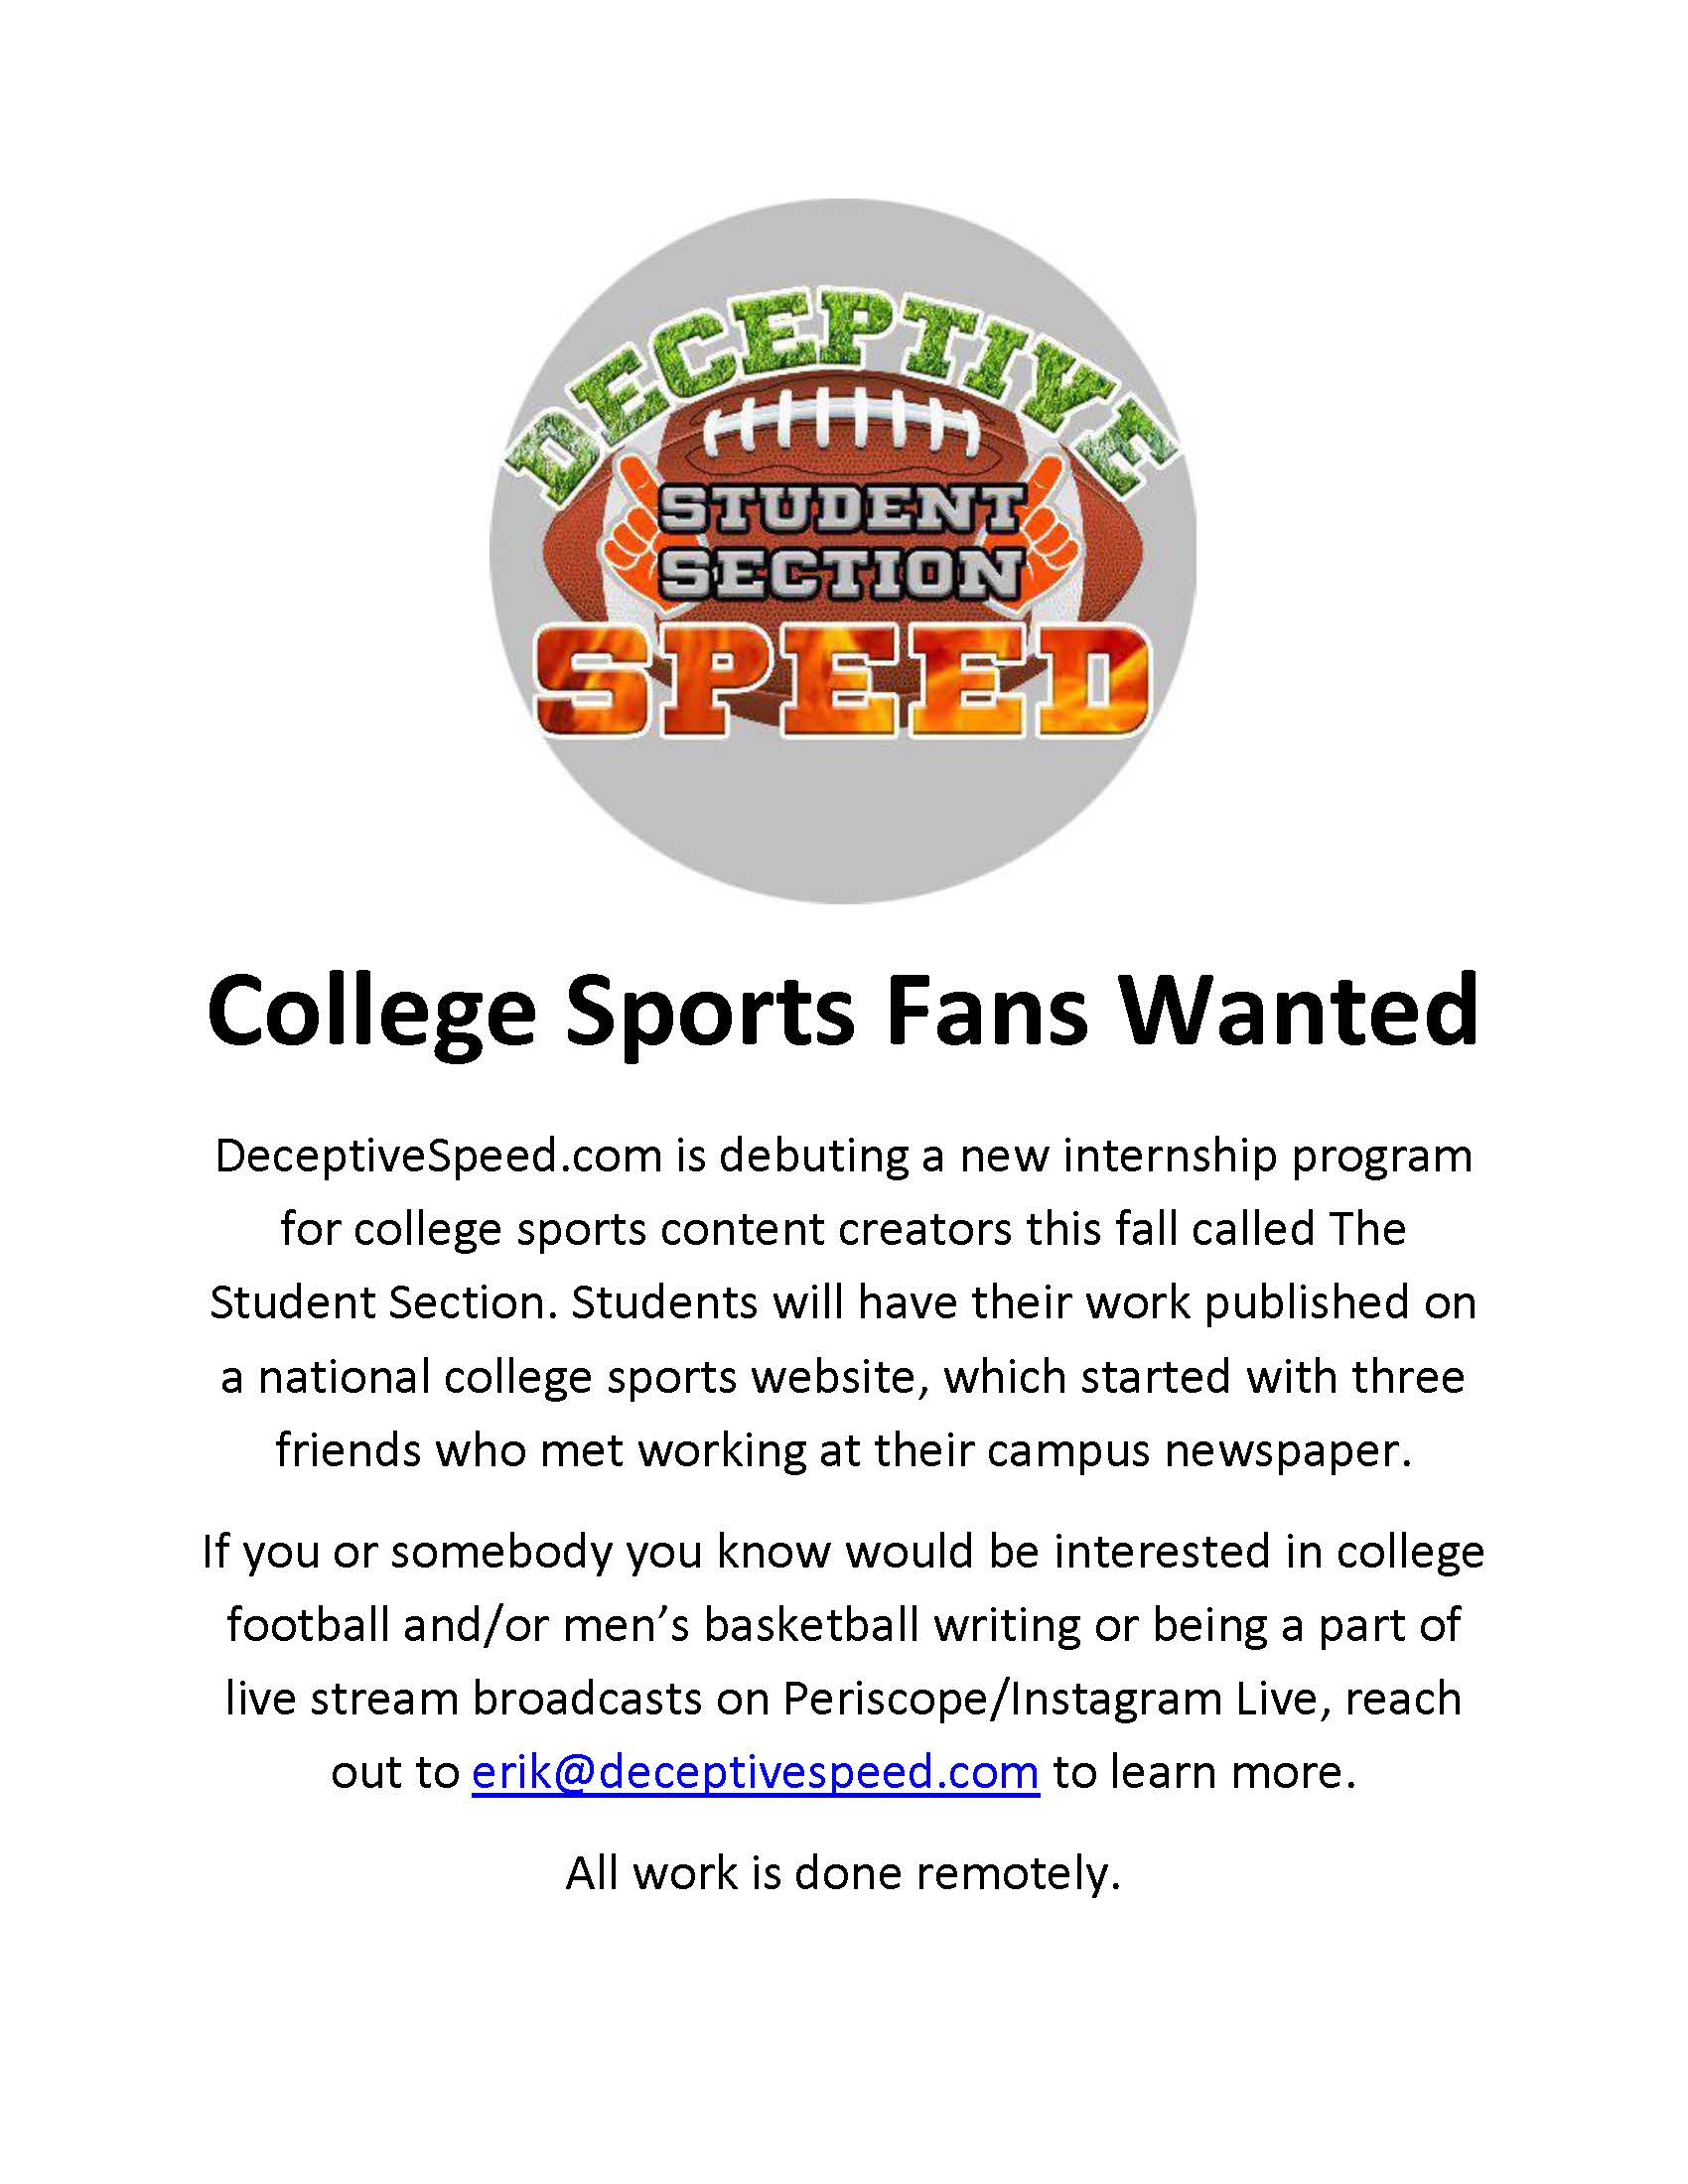 College Sports Fans Wanted - Deceptive Speed